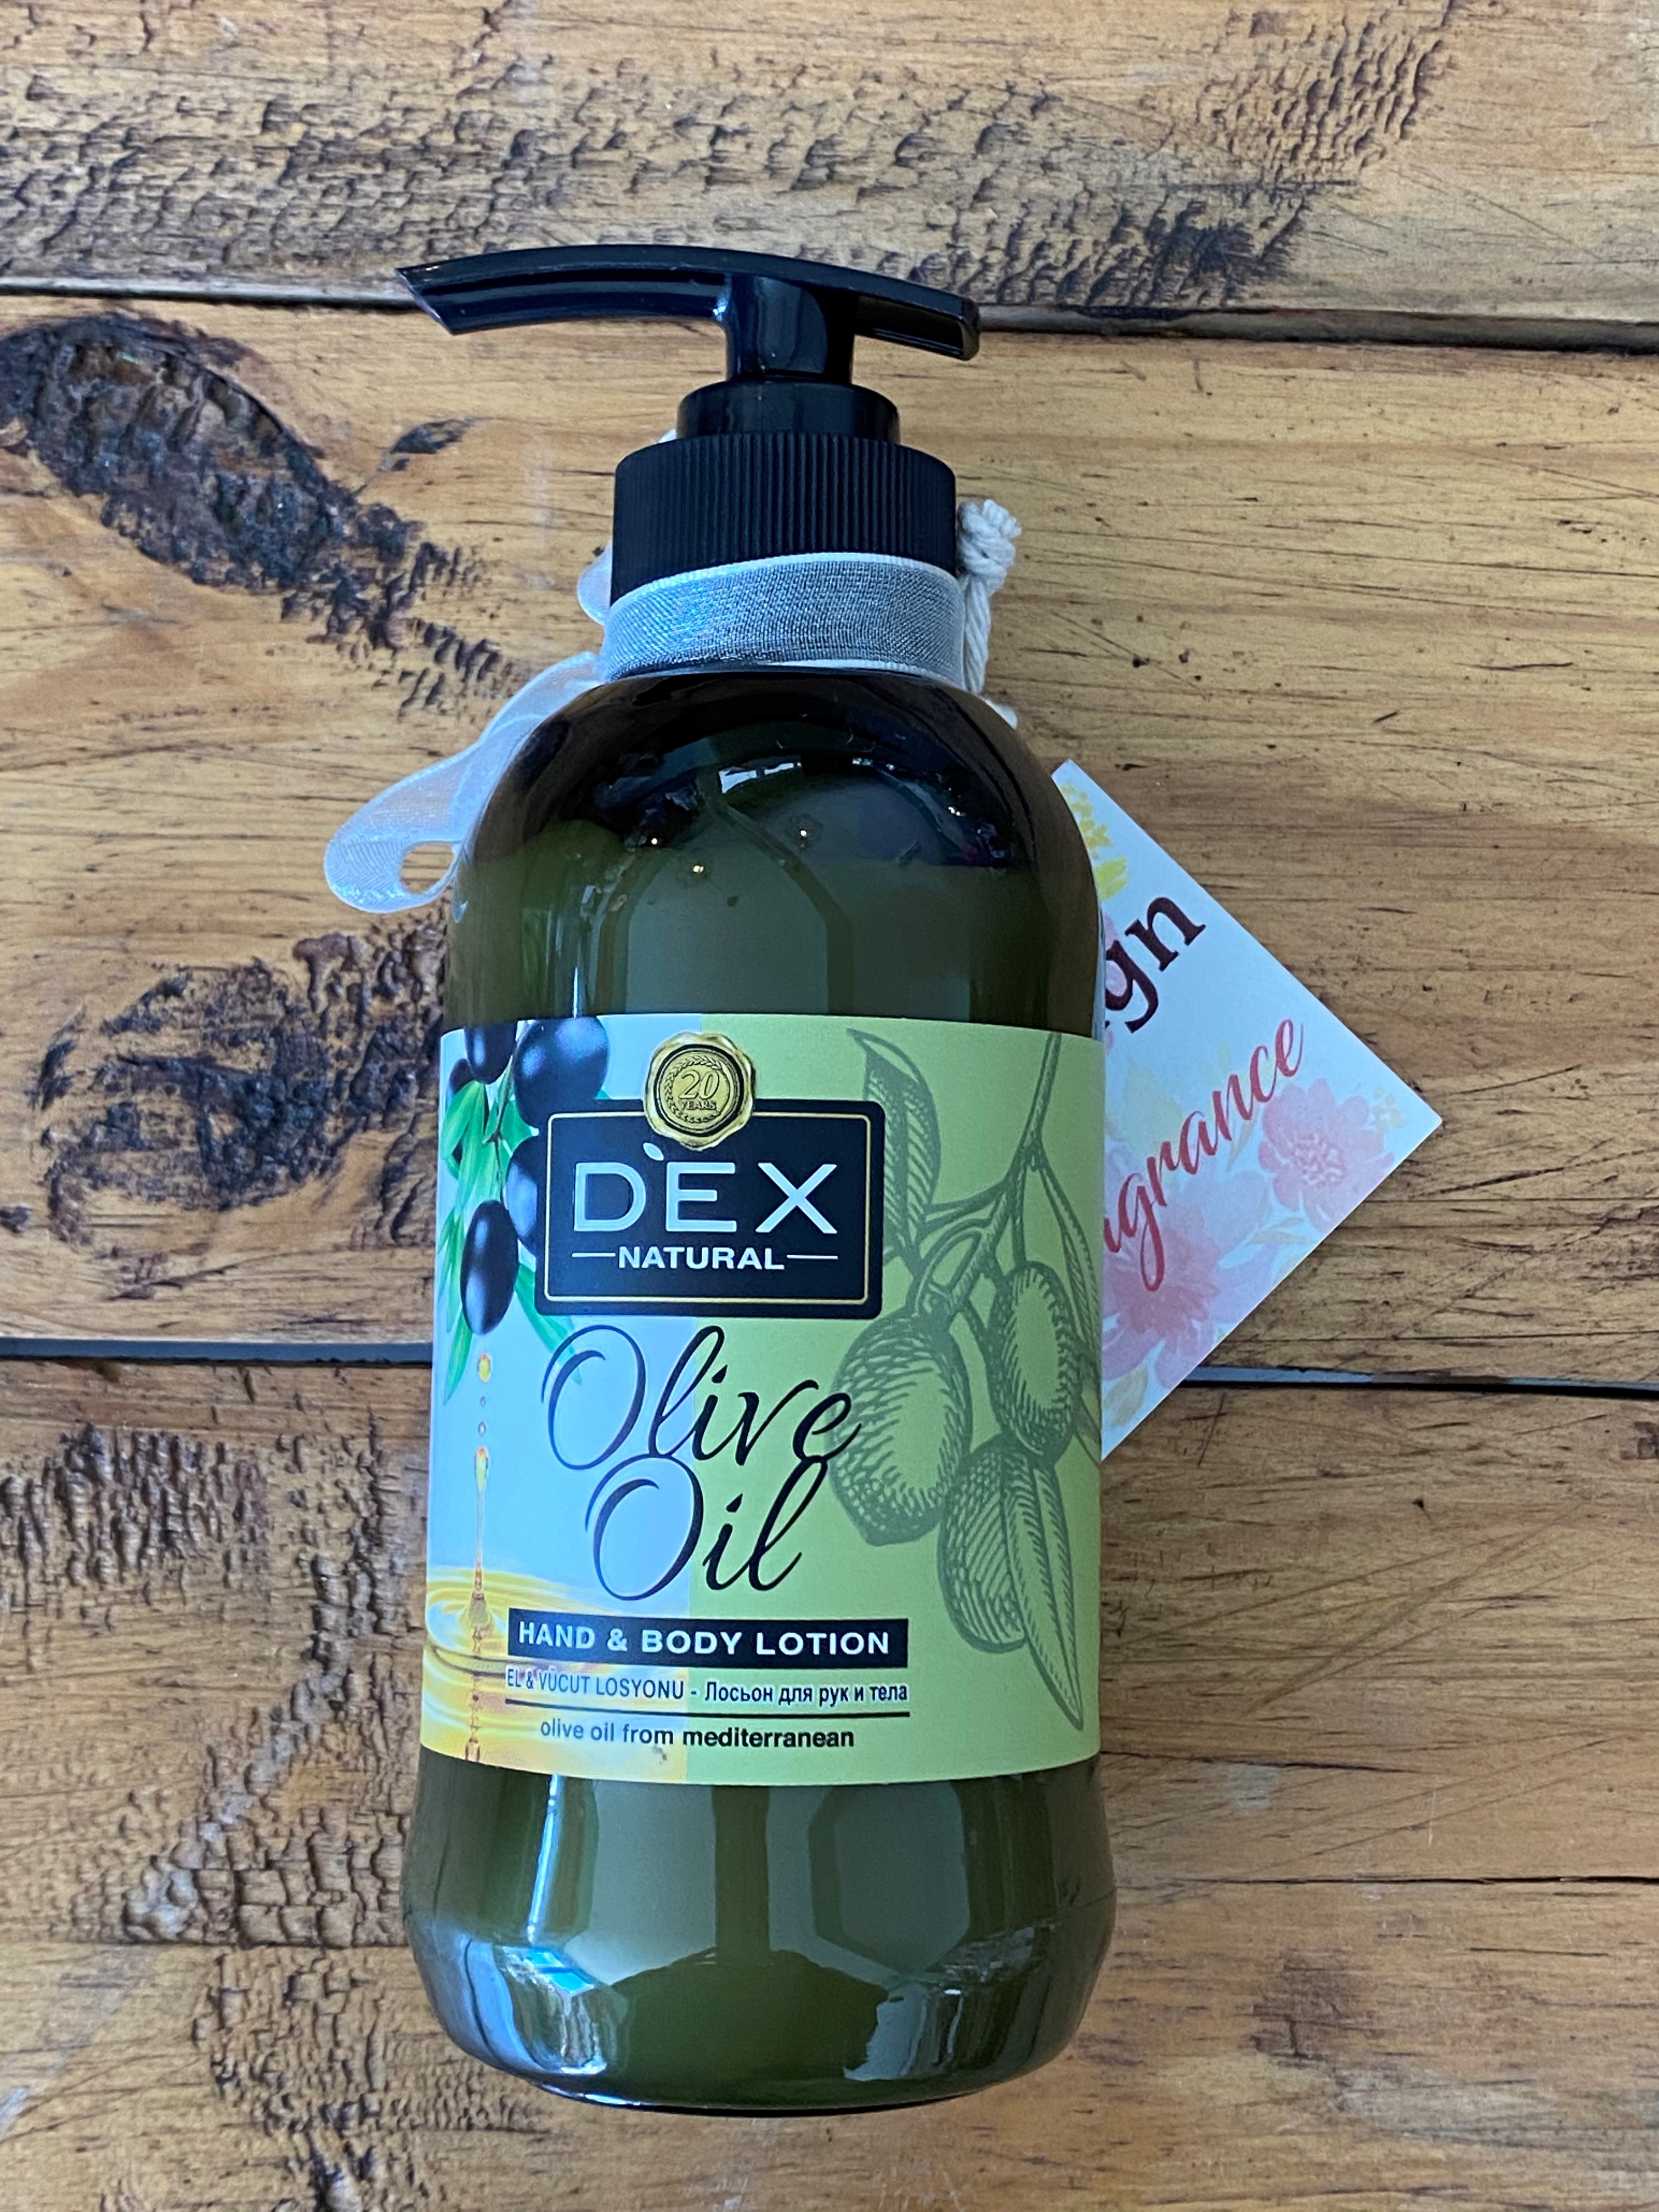 hand-and-body-lotion-dex--olive-oil